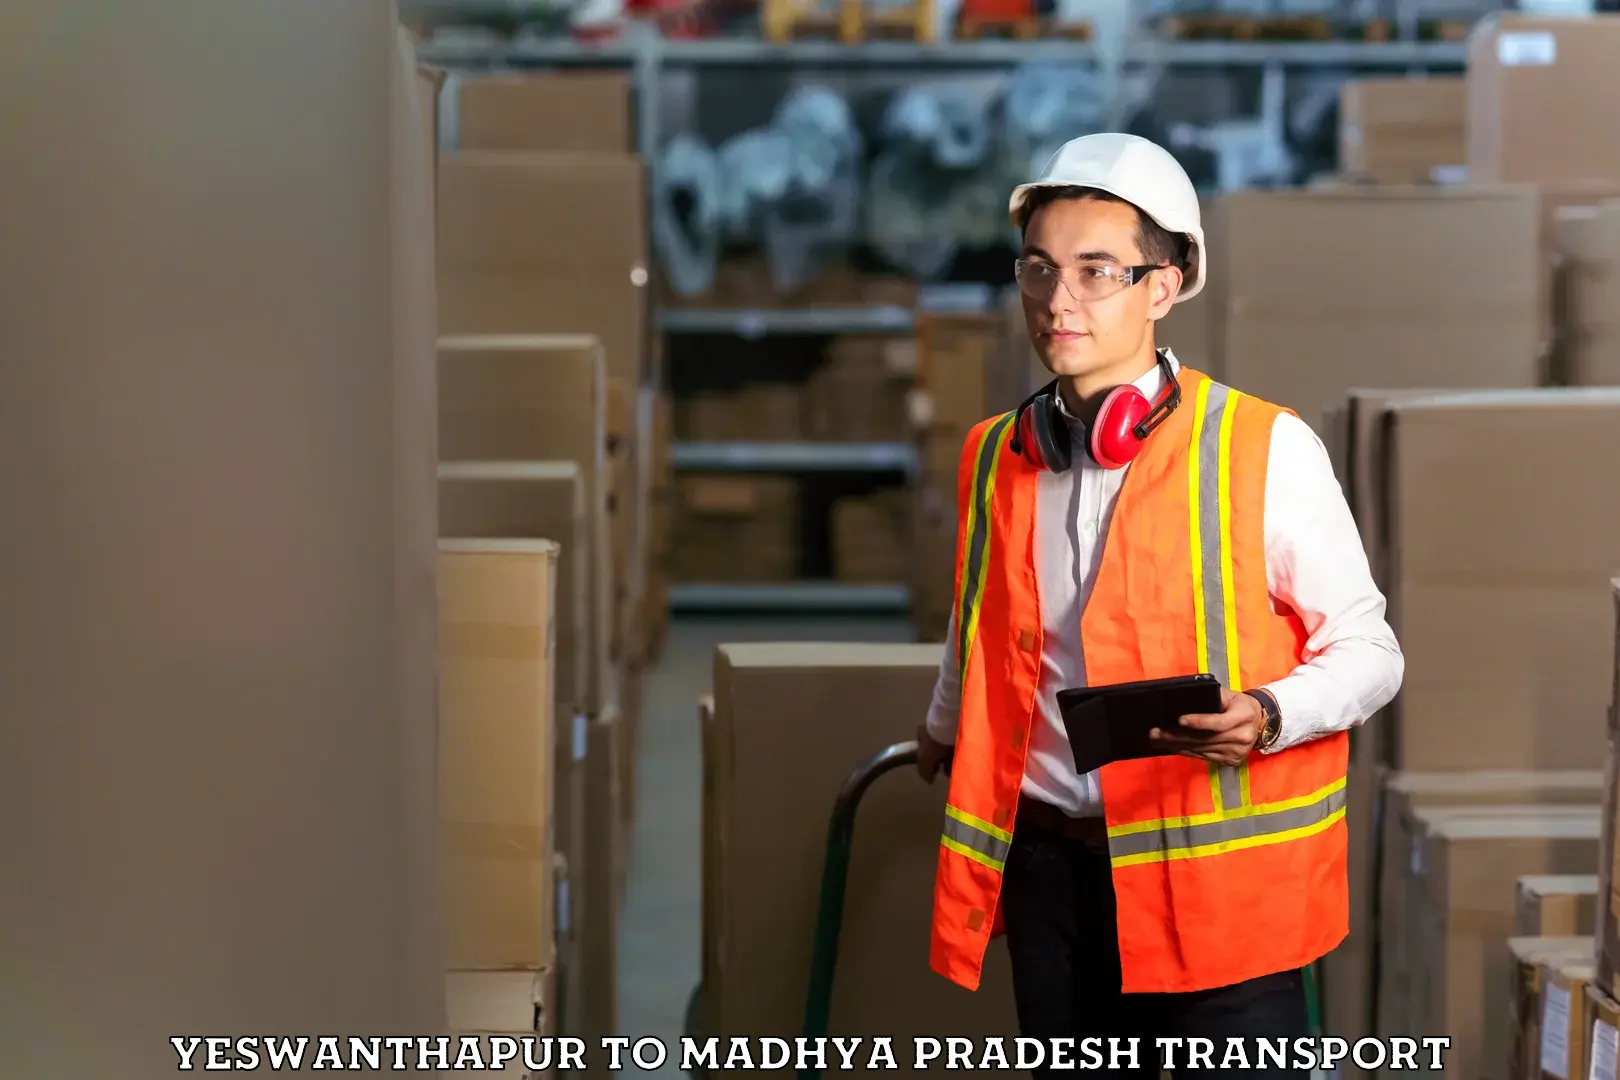 Goods delivery service Yeswanthapur to Madhya Pradesh